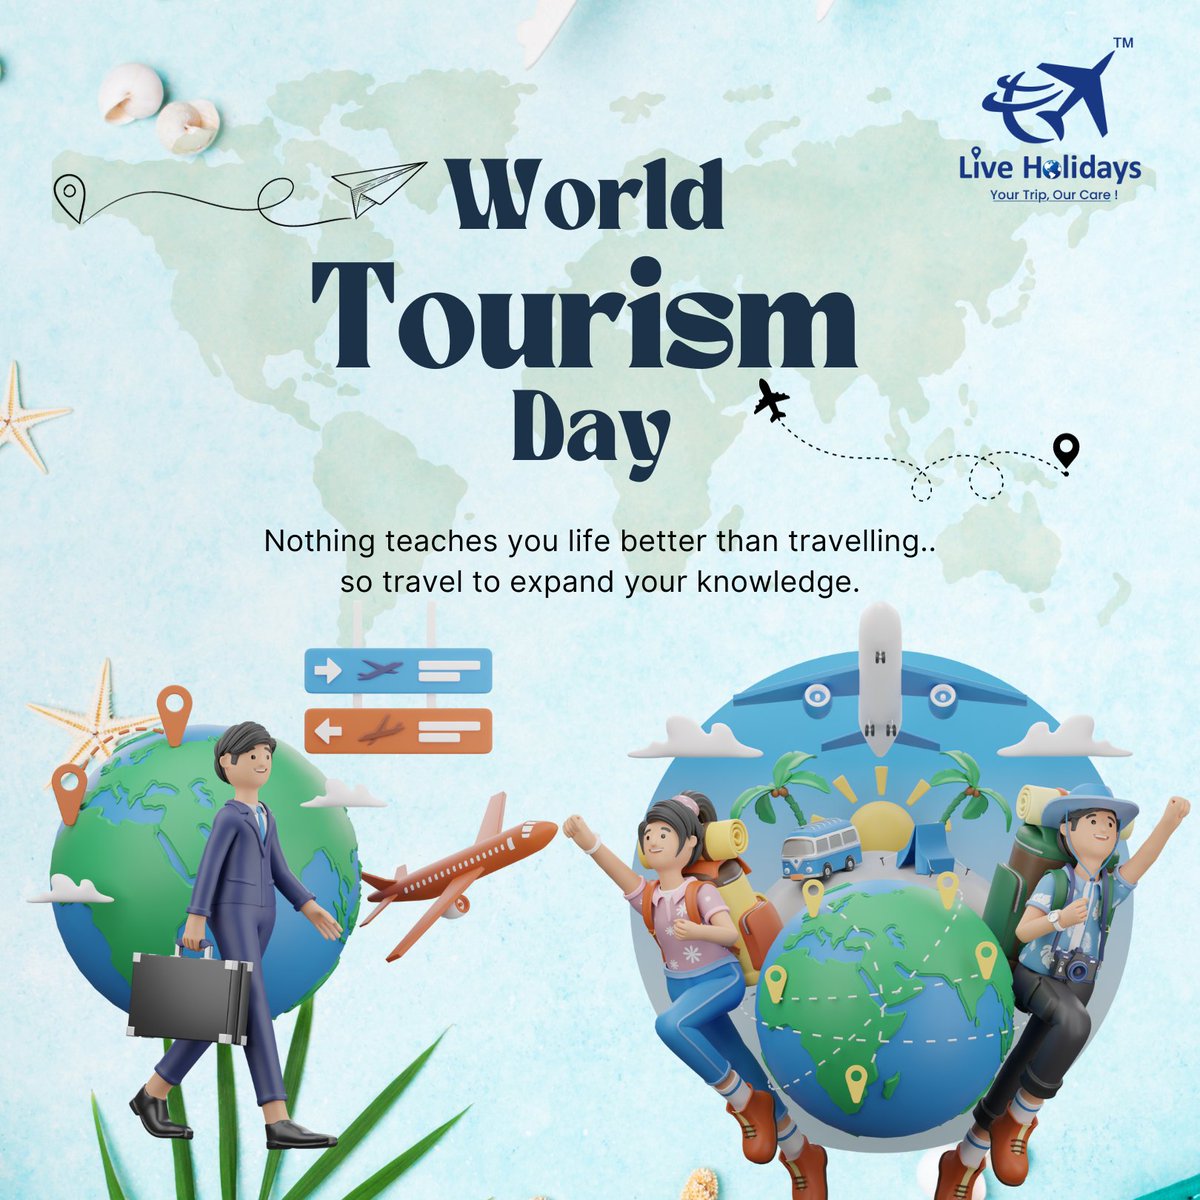 'Happy World Tourism Day, celebrated by Live Holidays! Explore the beauty of our planet and create unforgettable memories. #WorldTourismDay #TravelInspiration #LiveHolidays #ExploreTheWorld #Wanderlust #TravelGoals #AdventureAwaits #DiscoverNewPlaces #ICCWorldCup